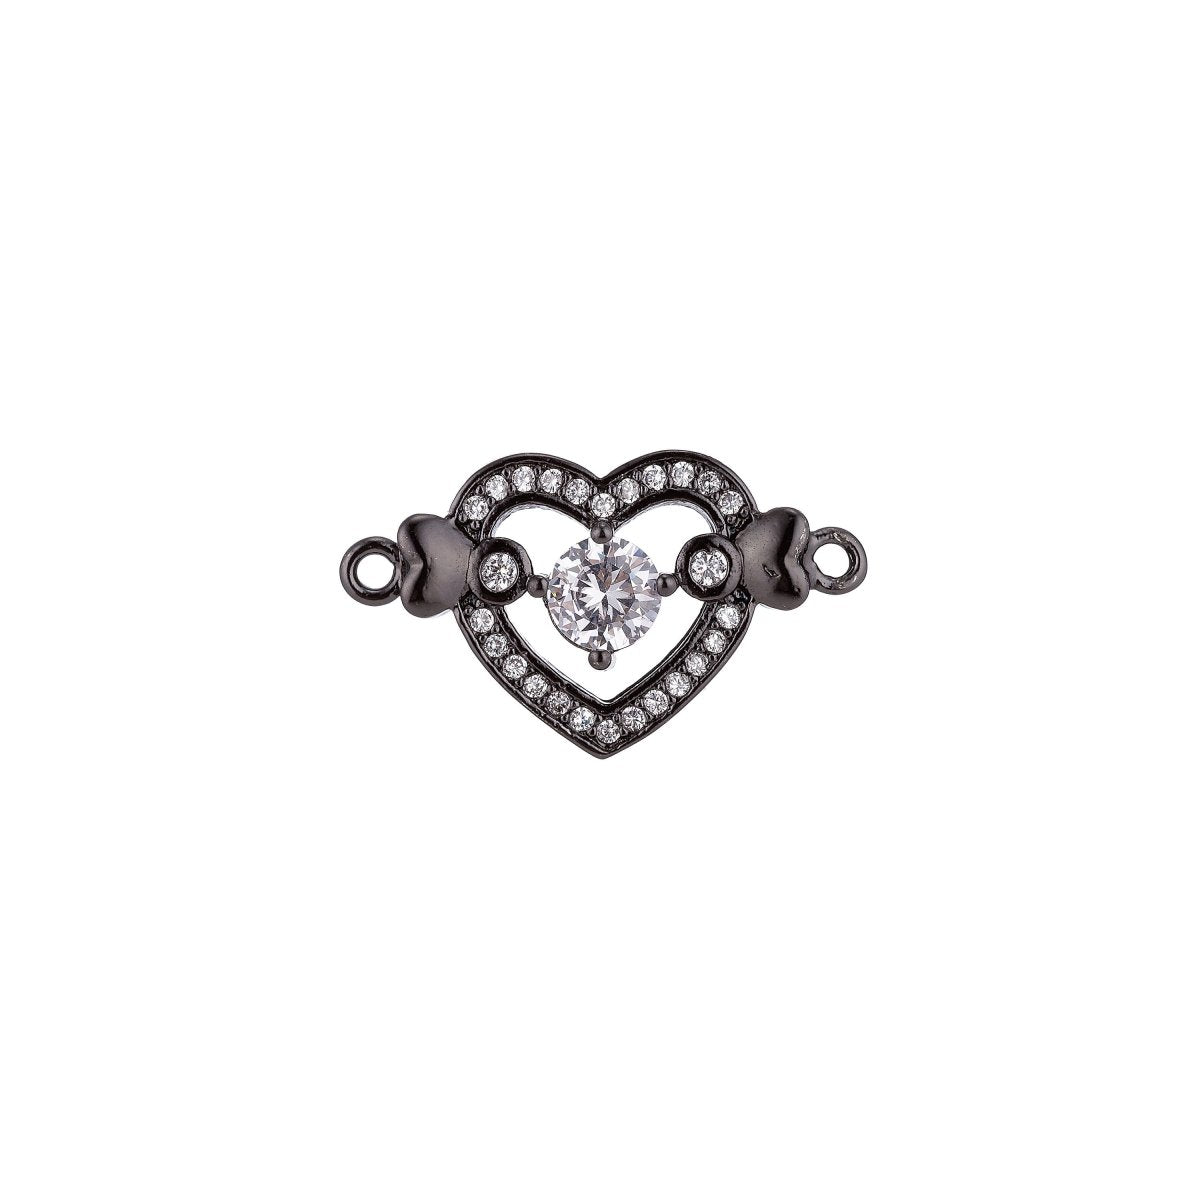 18K Gold Filled Lovely Elegant Heart With Crystal Cubic Zirconia Bracelet Charm Bead Finding Connector For Jewelry Making F-031 - DLUXCA